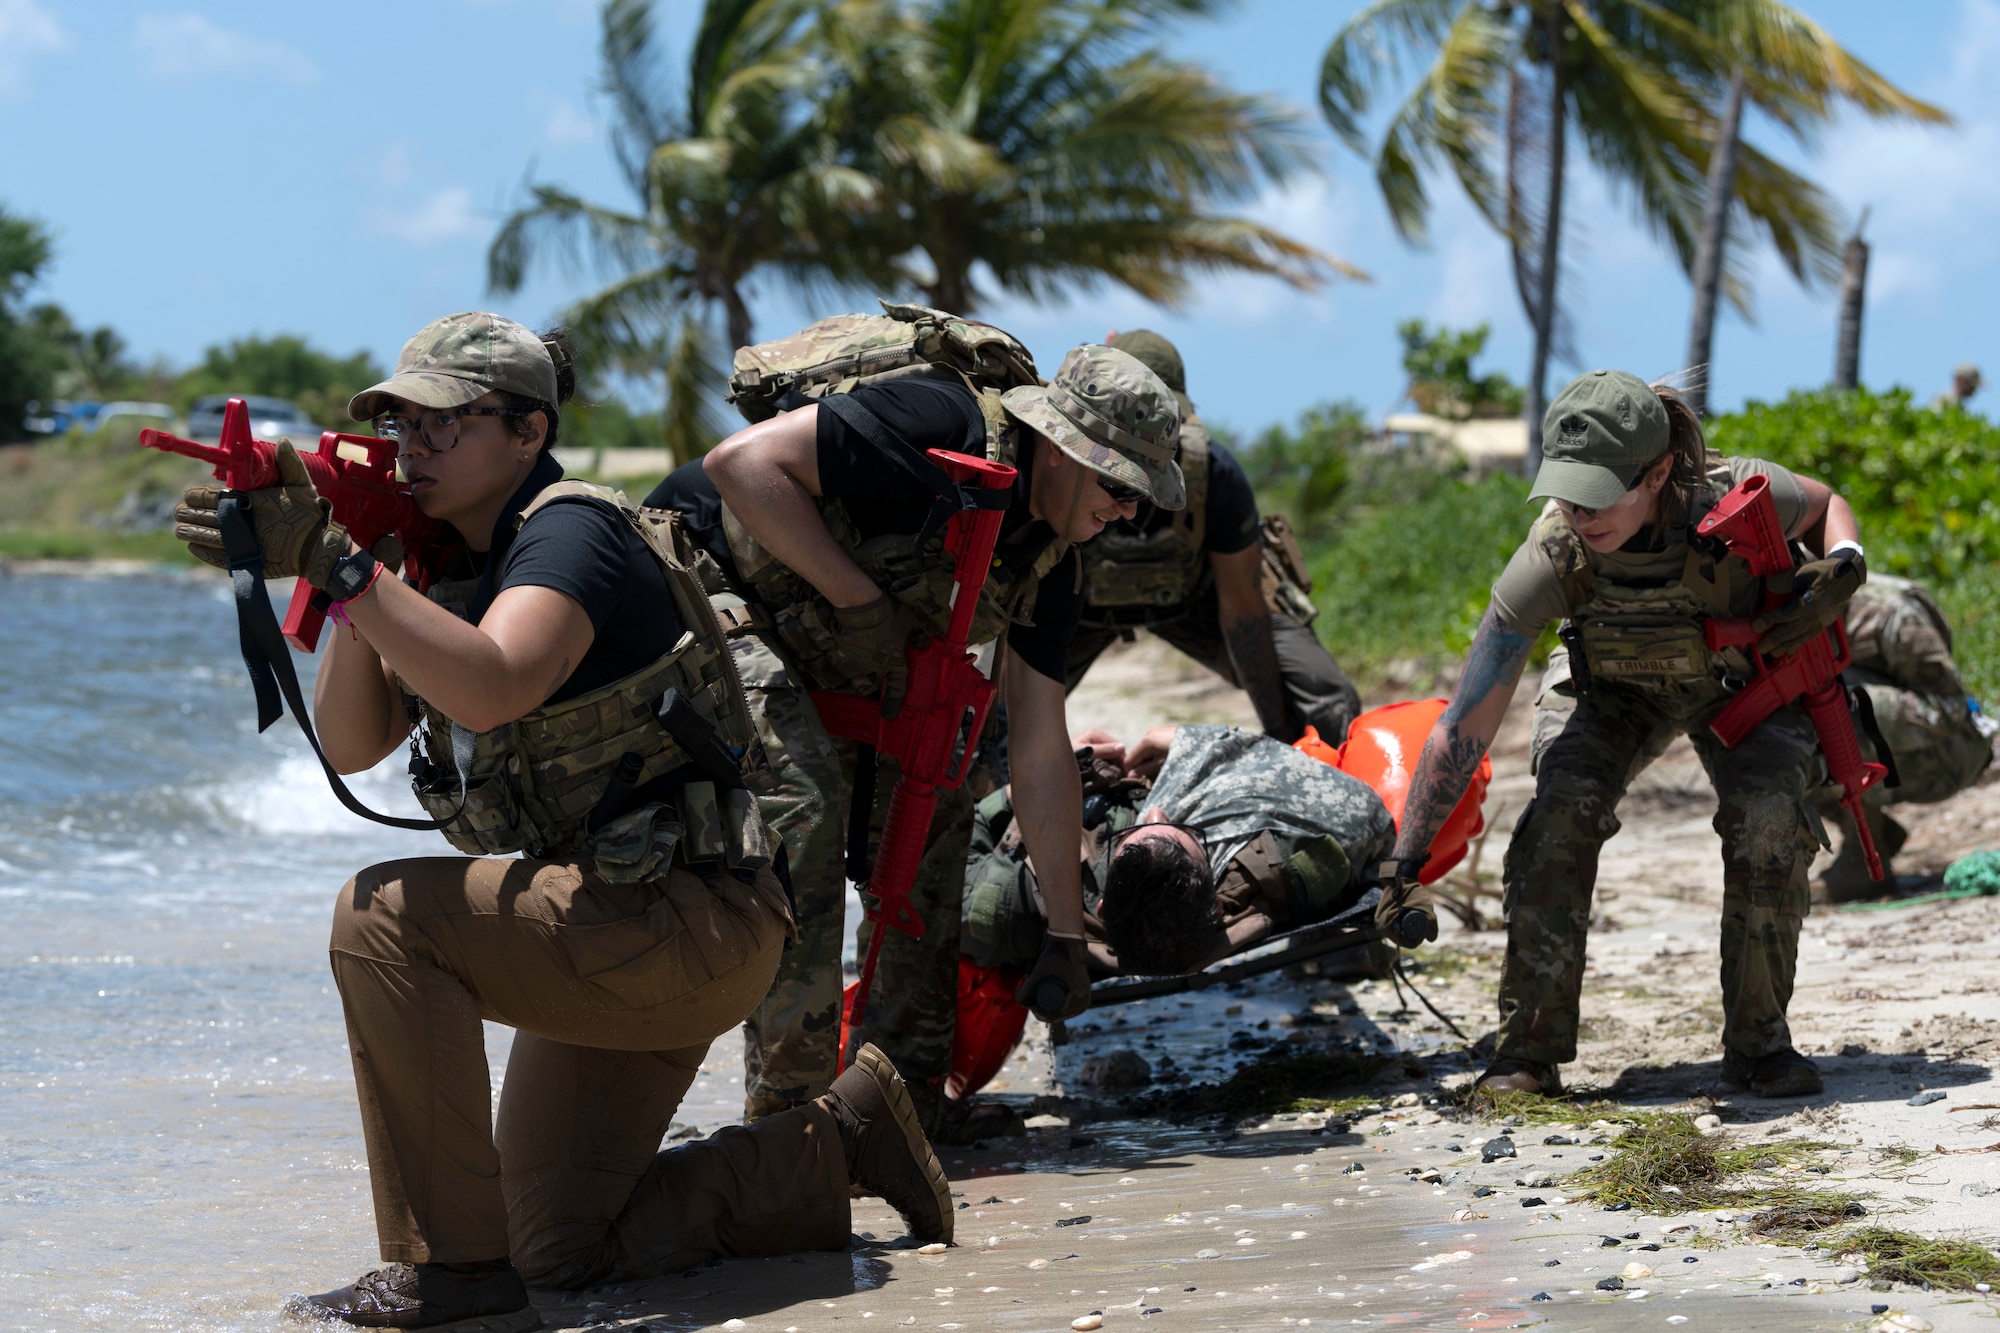 U.S. Airmen assigned to the 156th Security Operations Squadron, prepare to carry a simulated distressed person to receive medical care during the Advisor Edge exercise at Roosevelt Roads, Ceiba, Puerto Rico, June 8, 2023. Advisor Edge was a multi-unit exercise with the integration of government agencies, where participant units tested air advising skills and strengthened partnerships through unique challenges, allowing burden sharing in combat with partner nations. (U.S. Air National Guard photo by Master Sgt. Rafael D. Rosa)